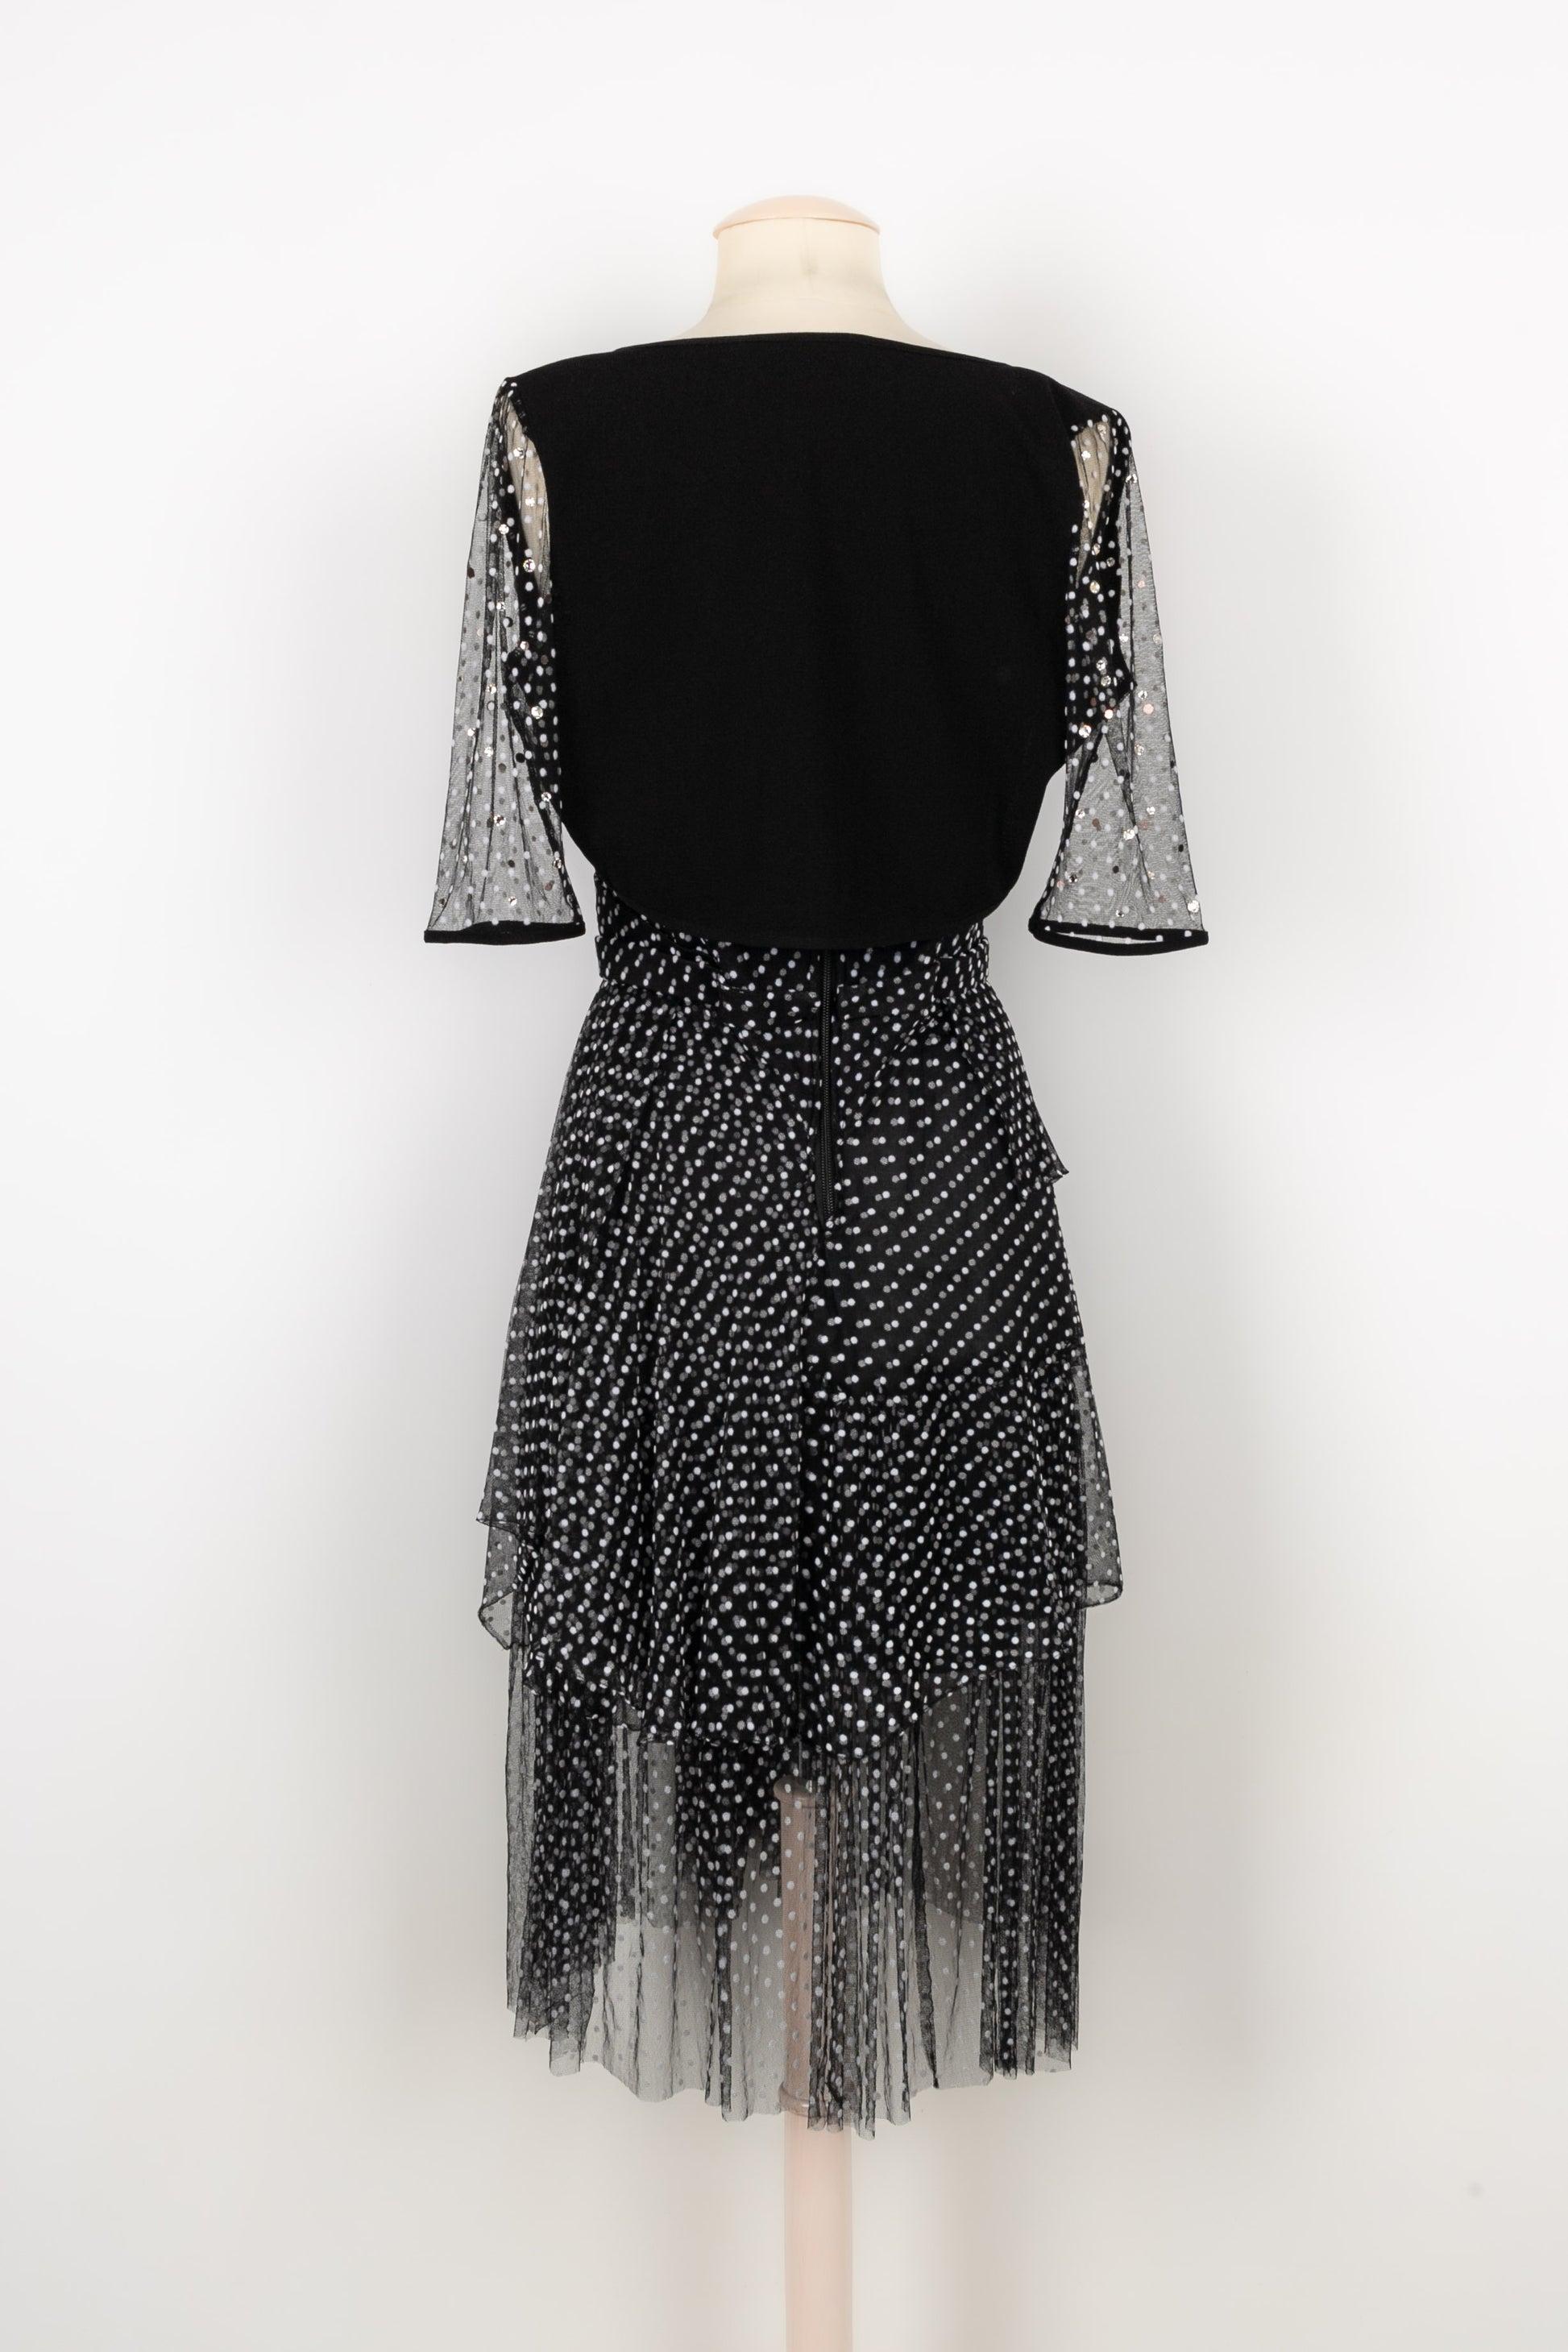 Black Christian Lacroix Set Composed of a Dress and a Bolero in Polka Dot, 1990s For Sale